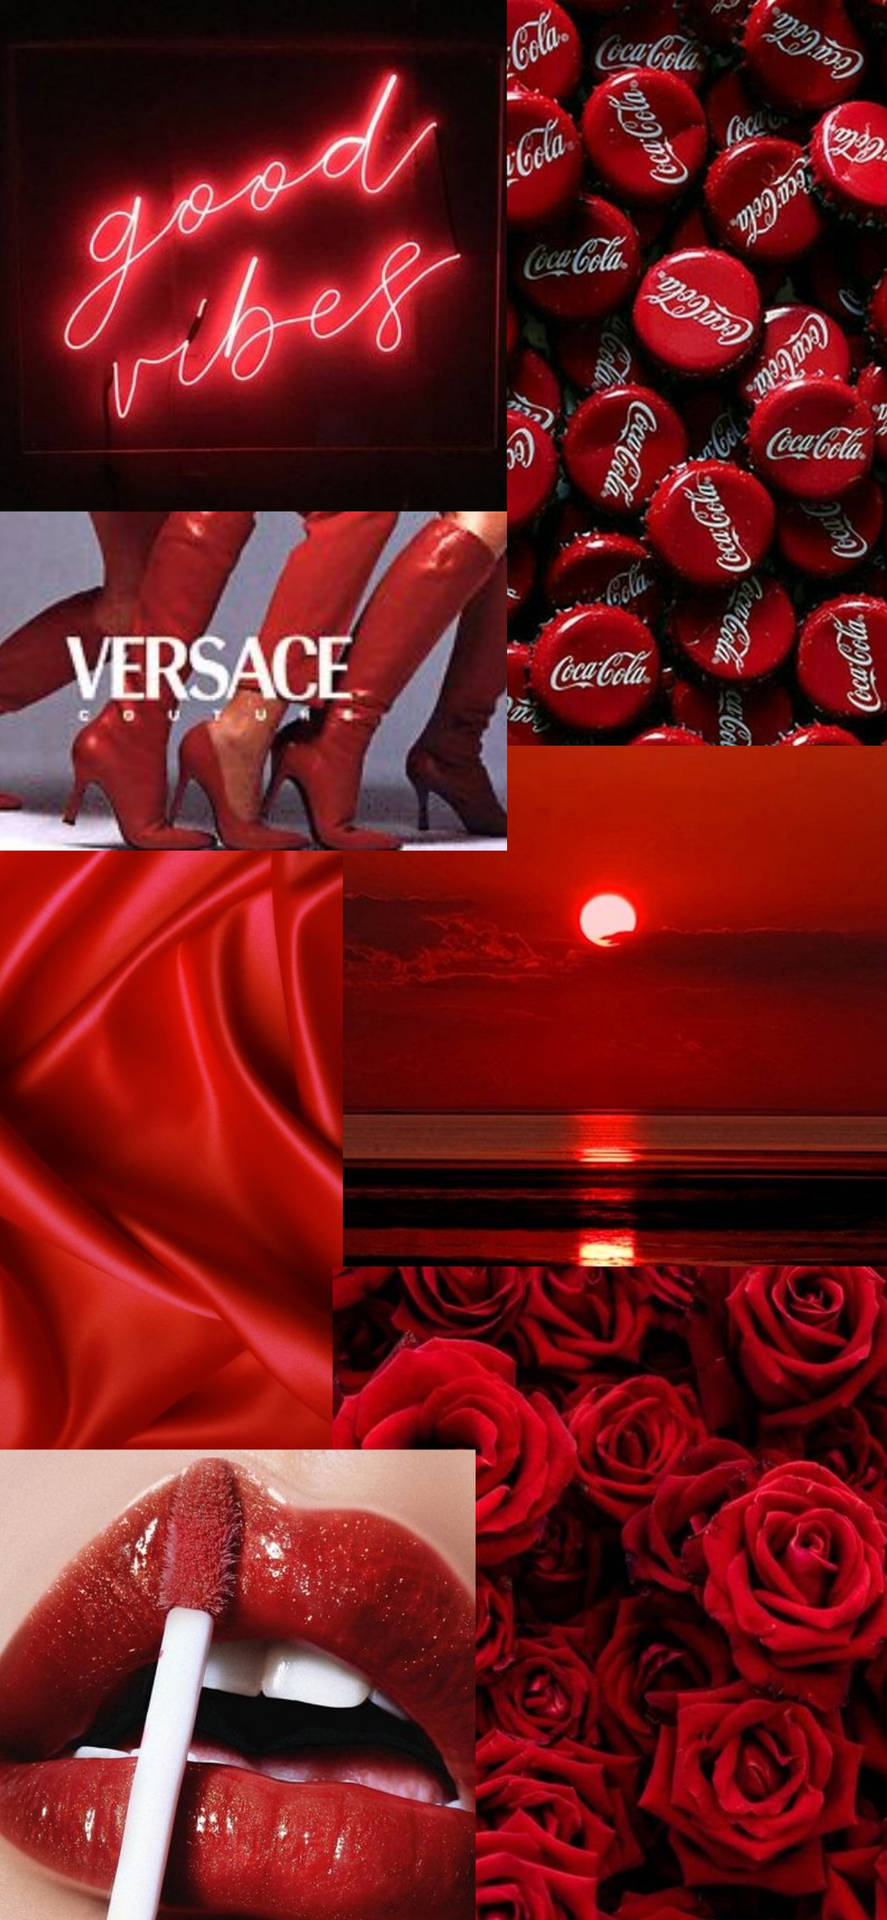 Versace Glossy Red Aesthetic Iphone Background